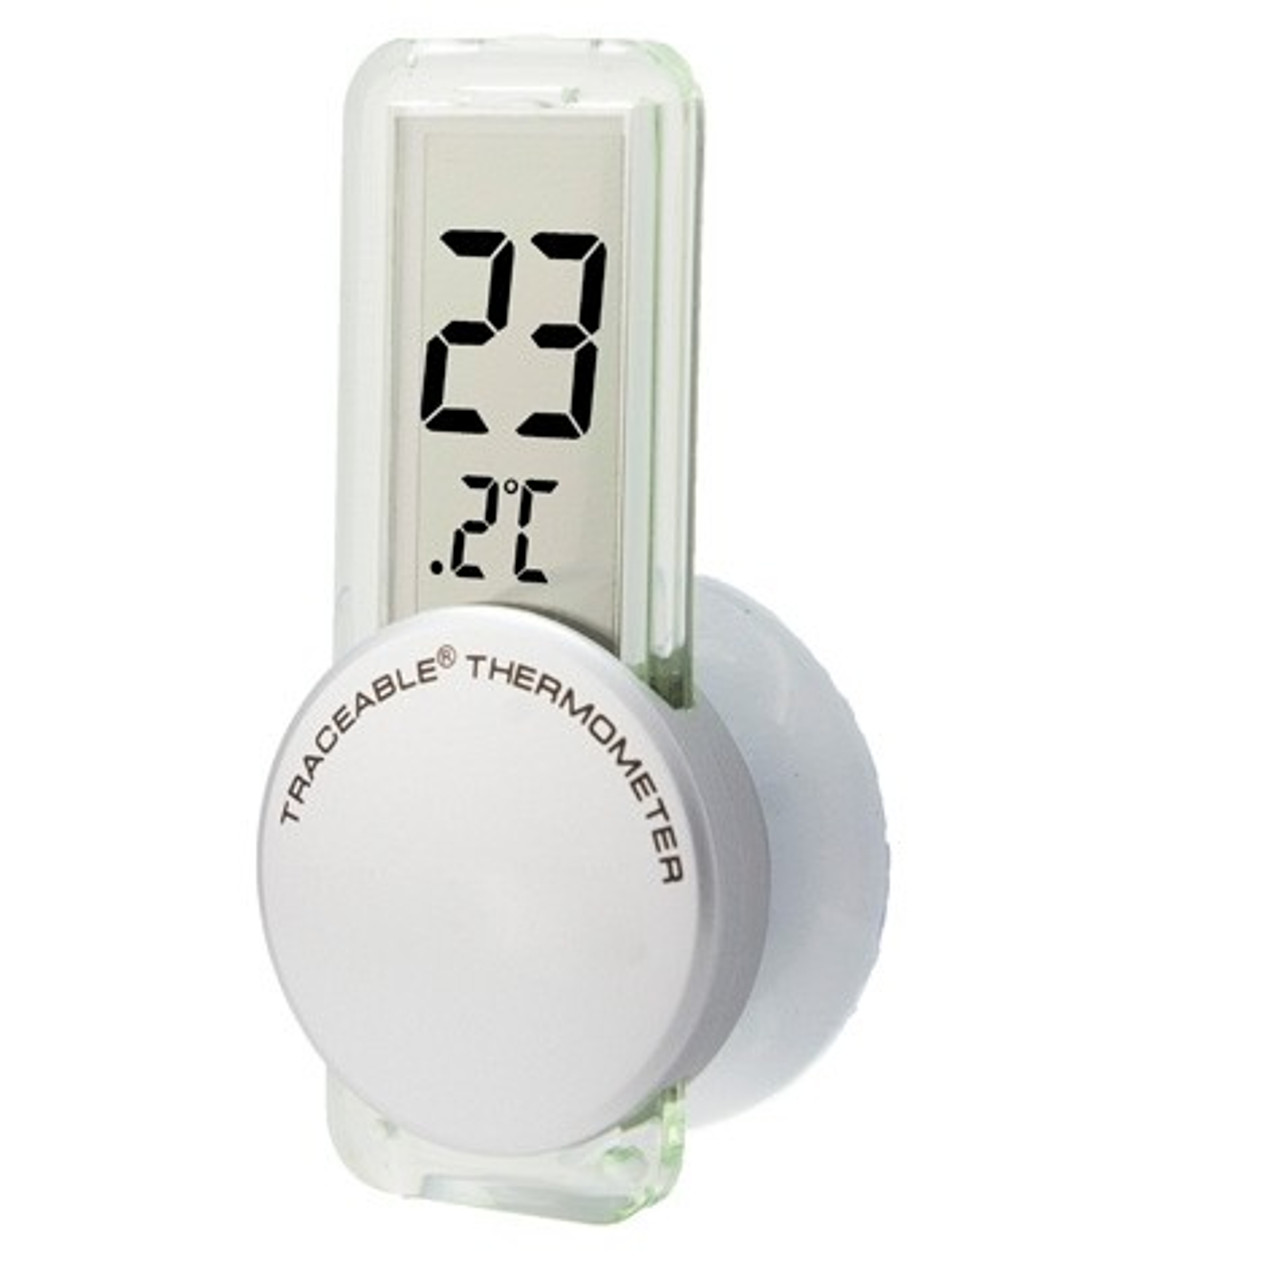 https://cdn11.bigcommerce.com/s-48gxyyxkag/images/stencil/1280x1280/products/25963/68788/Control_Company_4157_Traceable_Econo_Refrigerator_Thermometer_-_CON4157__52160.1660332190.jpg?c=1